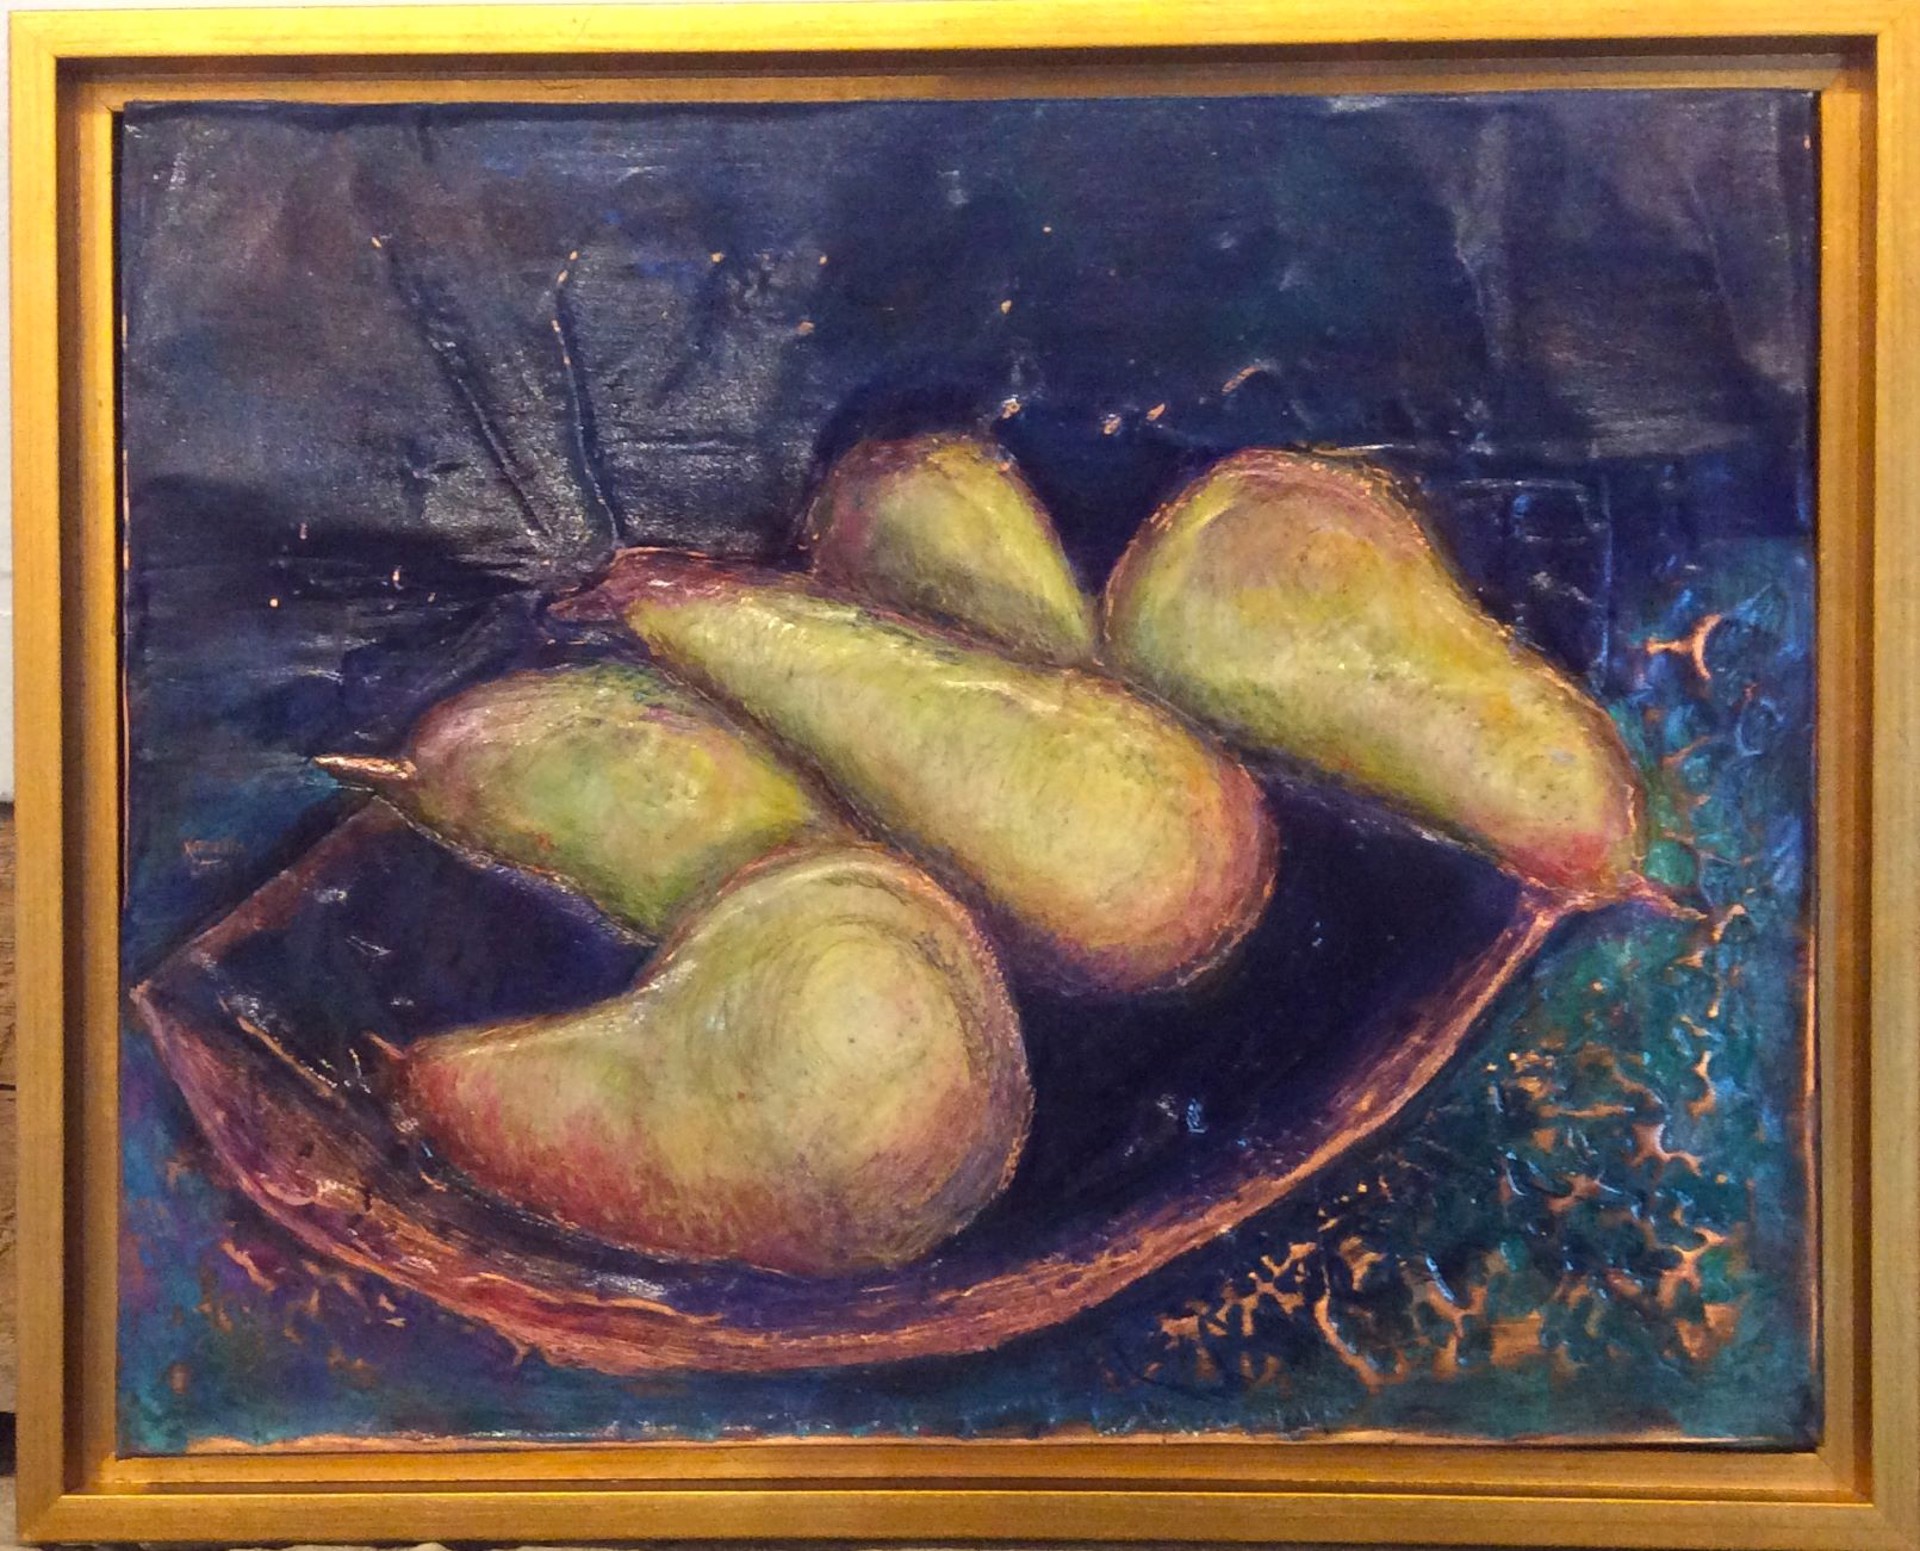 Pears by Kanella (Kandy) Otto